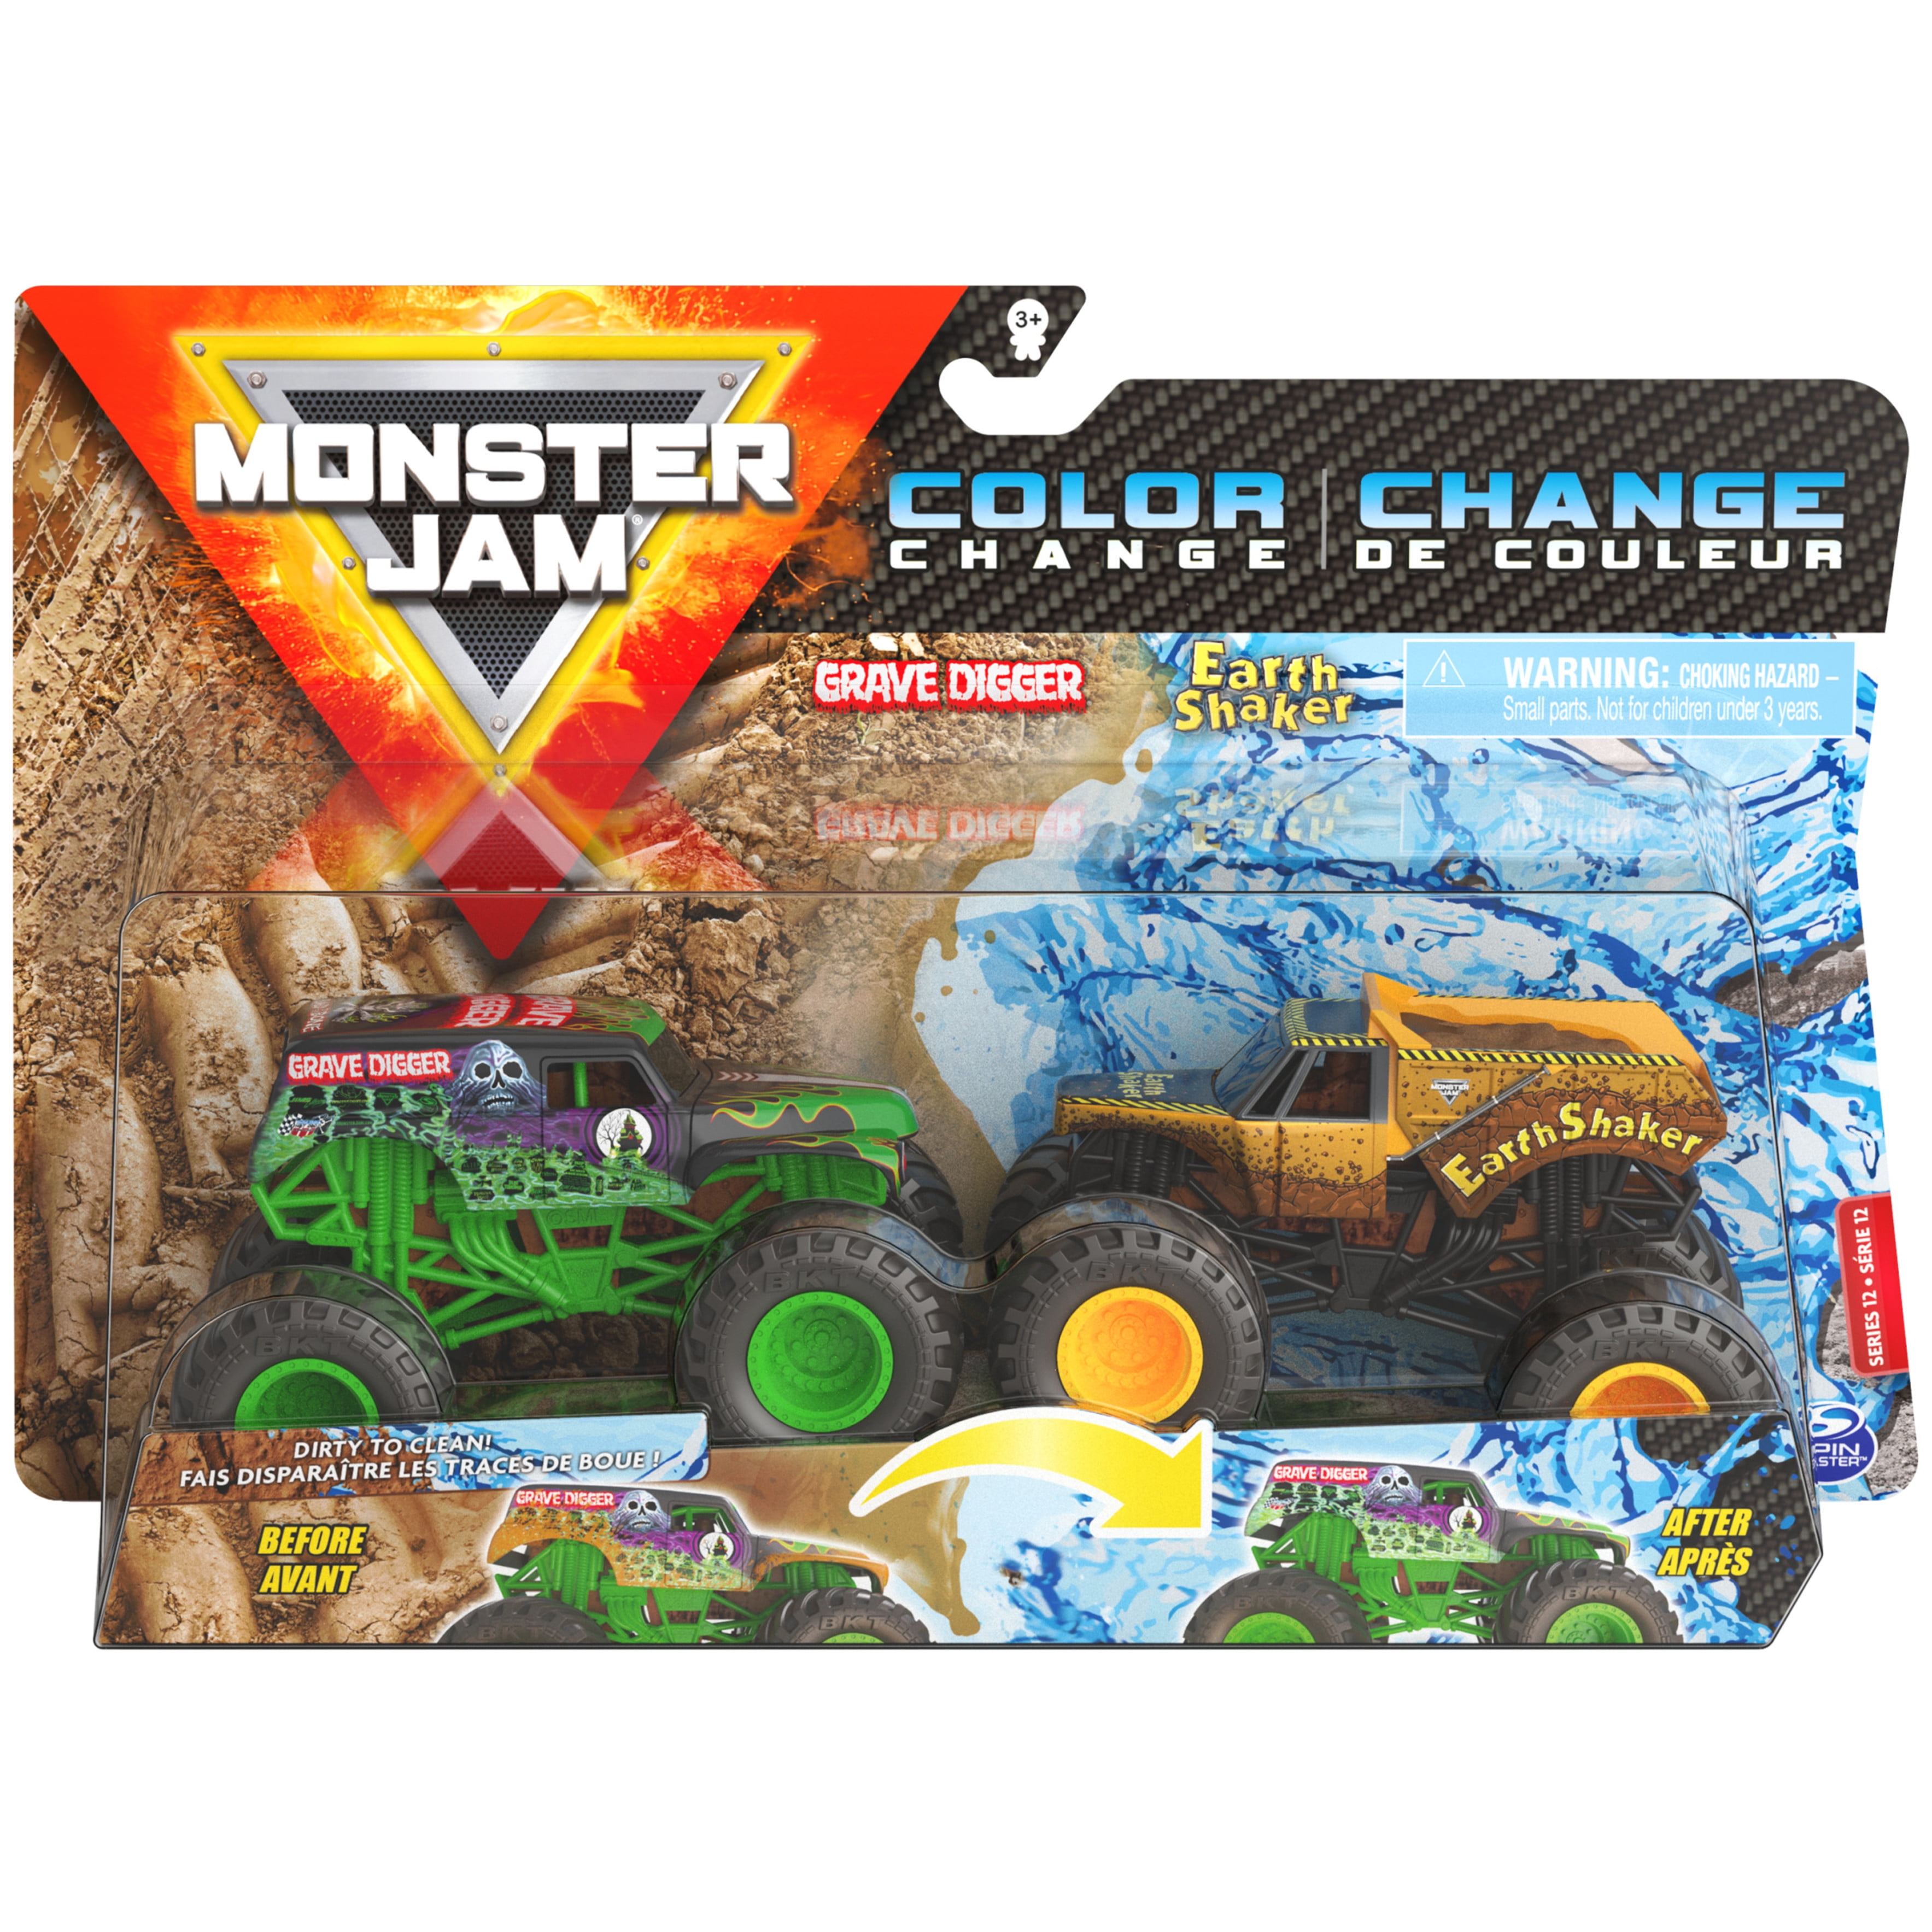 Monster Jam, 2-Pack Official Grave Digger and El Toro Loco Clip 